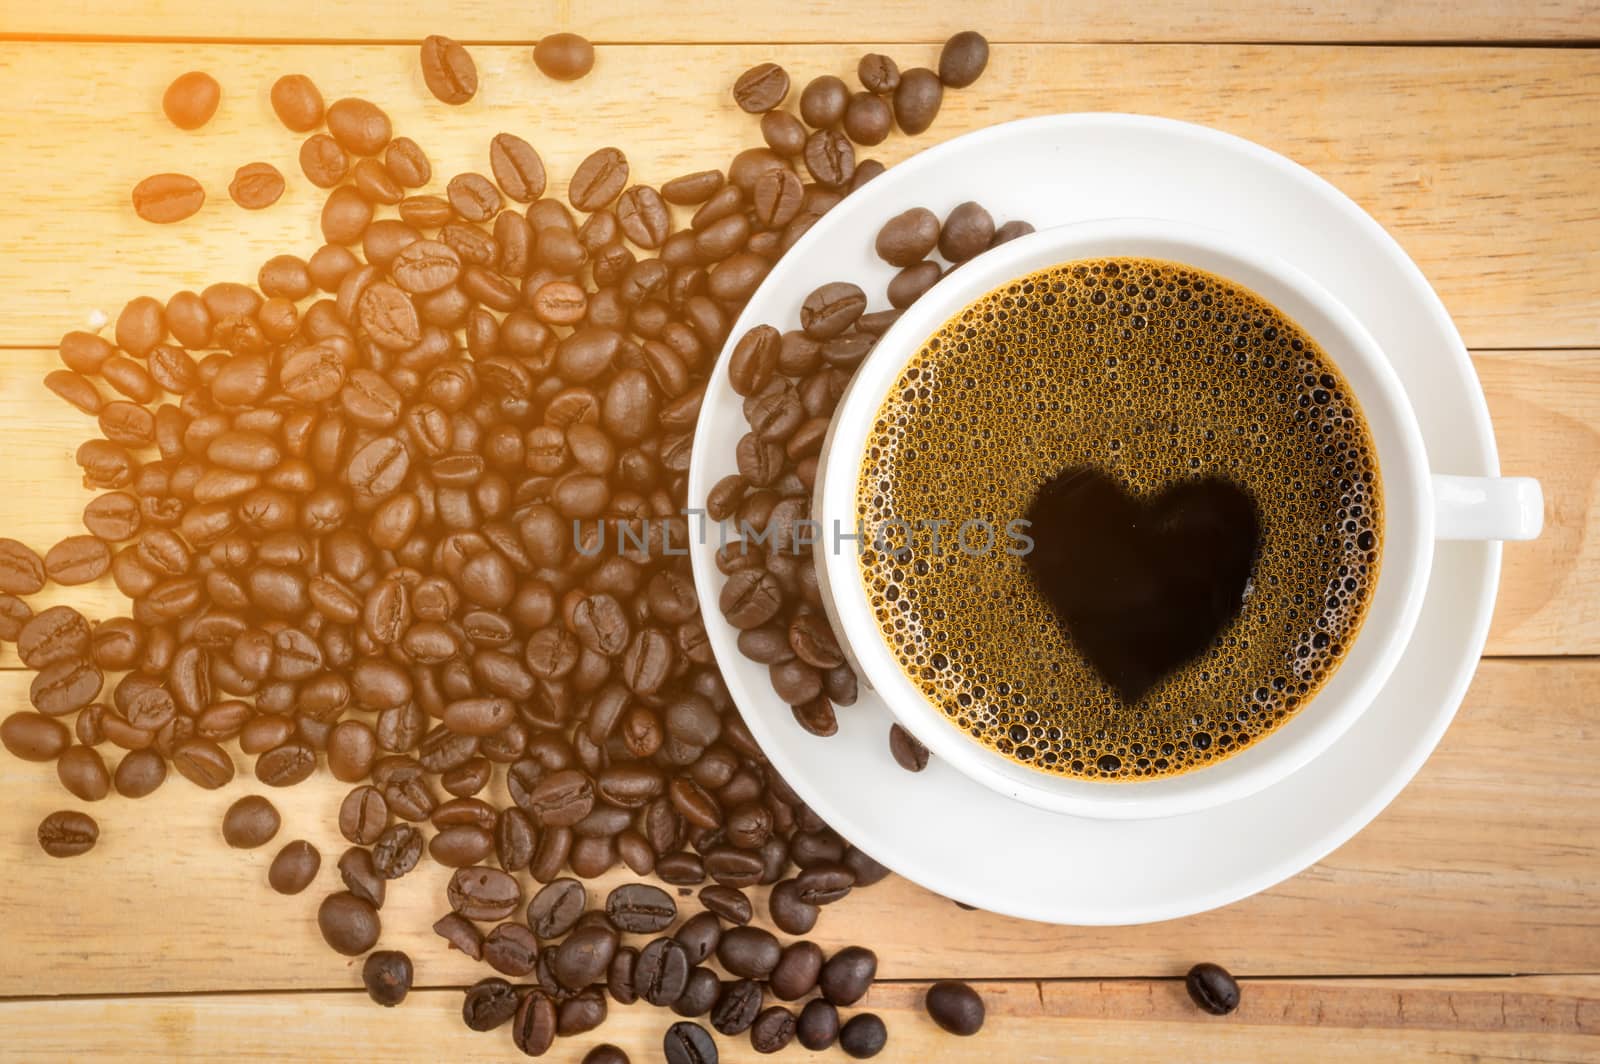 Cup of coffee with coffee bean on wood background.